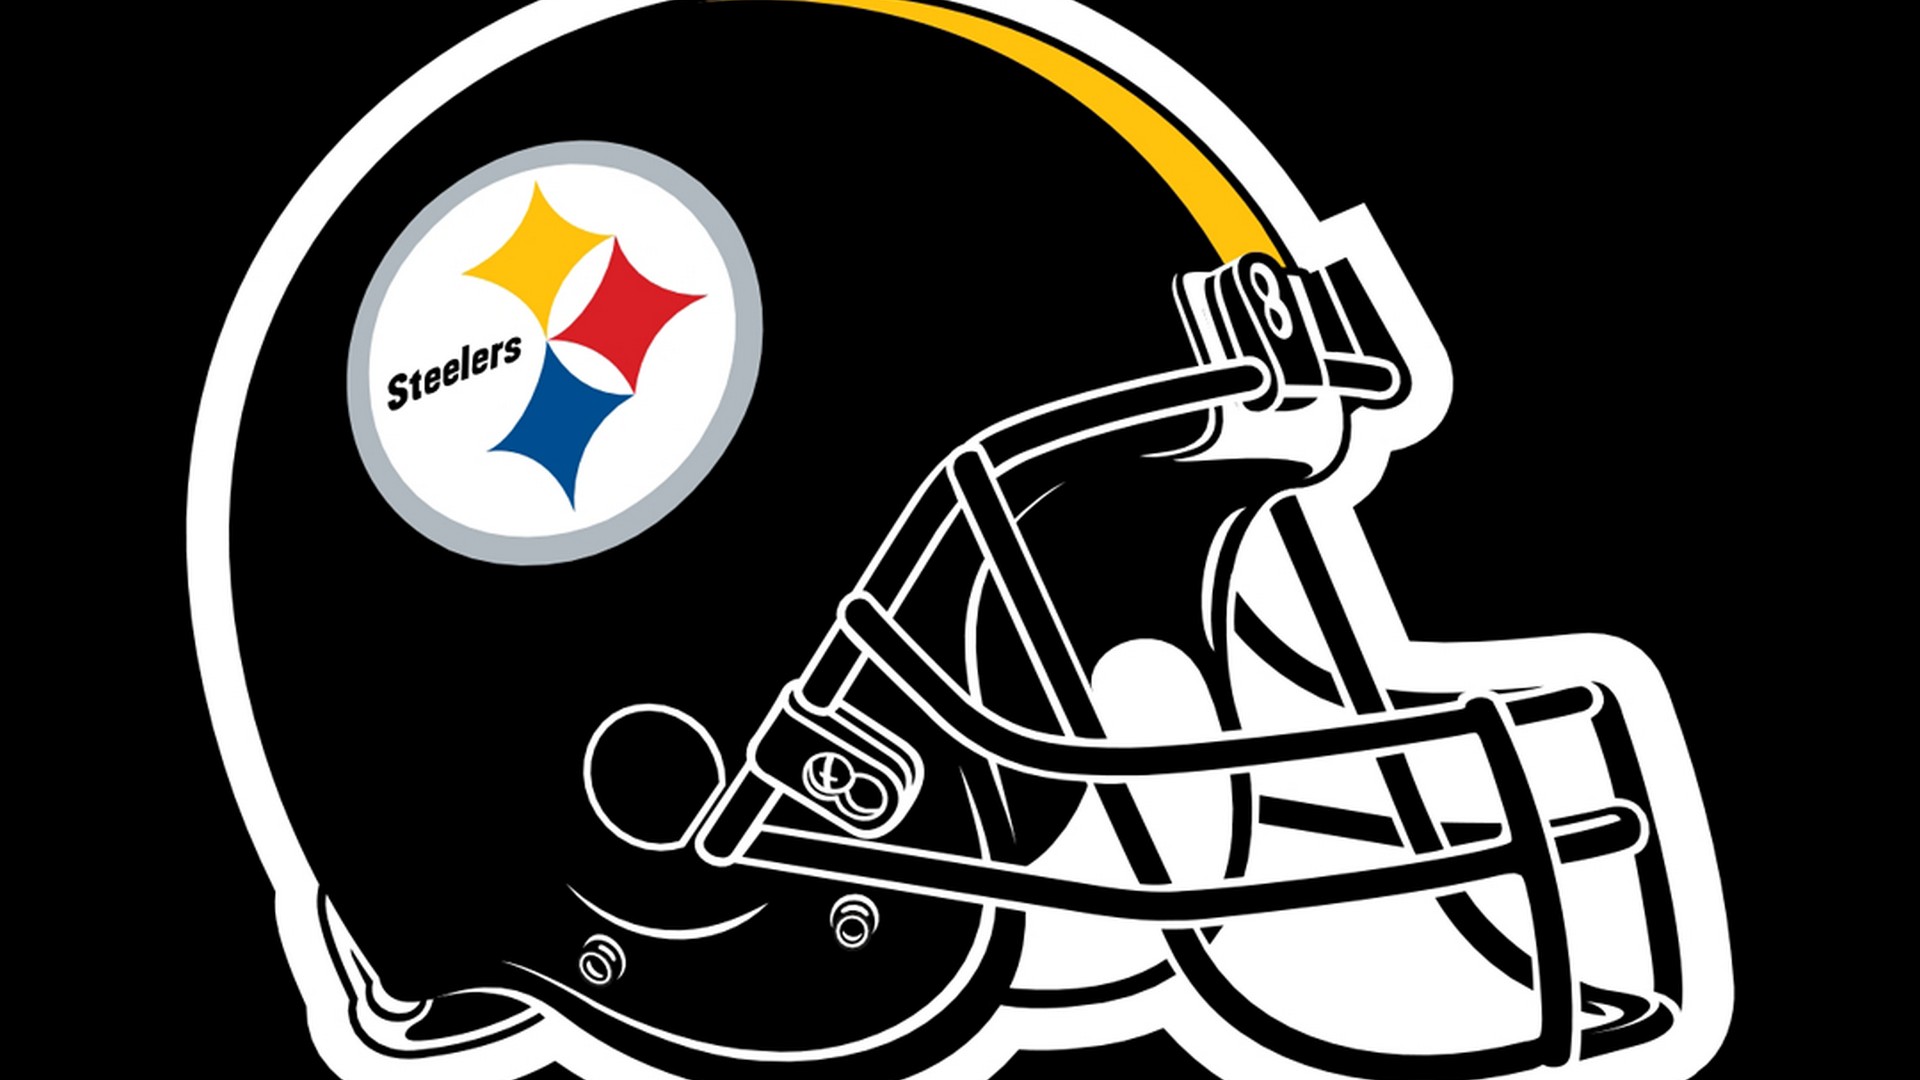 Steelers Wallpaper With Resolution 1920X1080 pixel. You can make this wallpaper for your Mac or Windows Desktop Background, iPhone, Android or Tablet and another Smartphone device for free